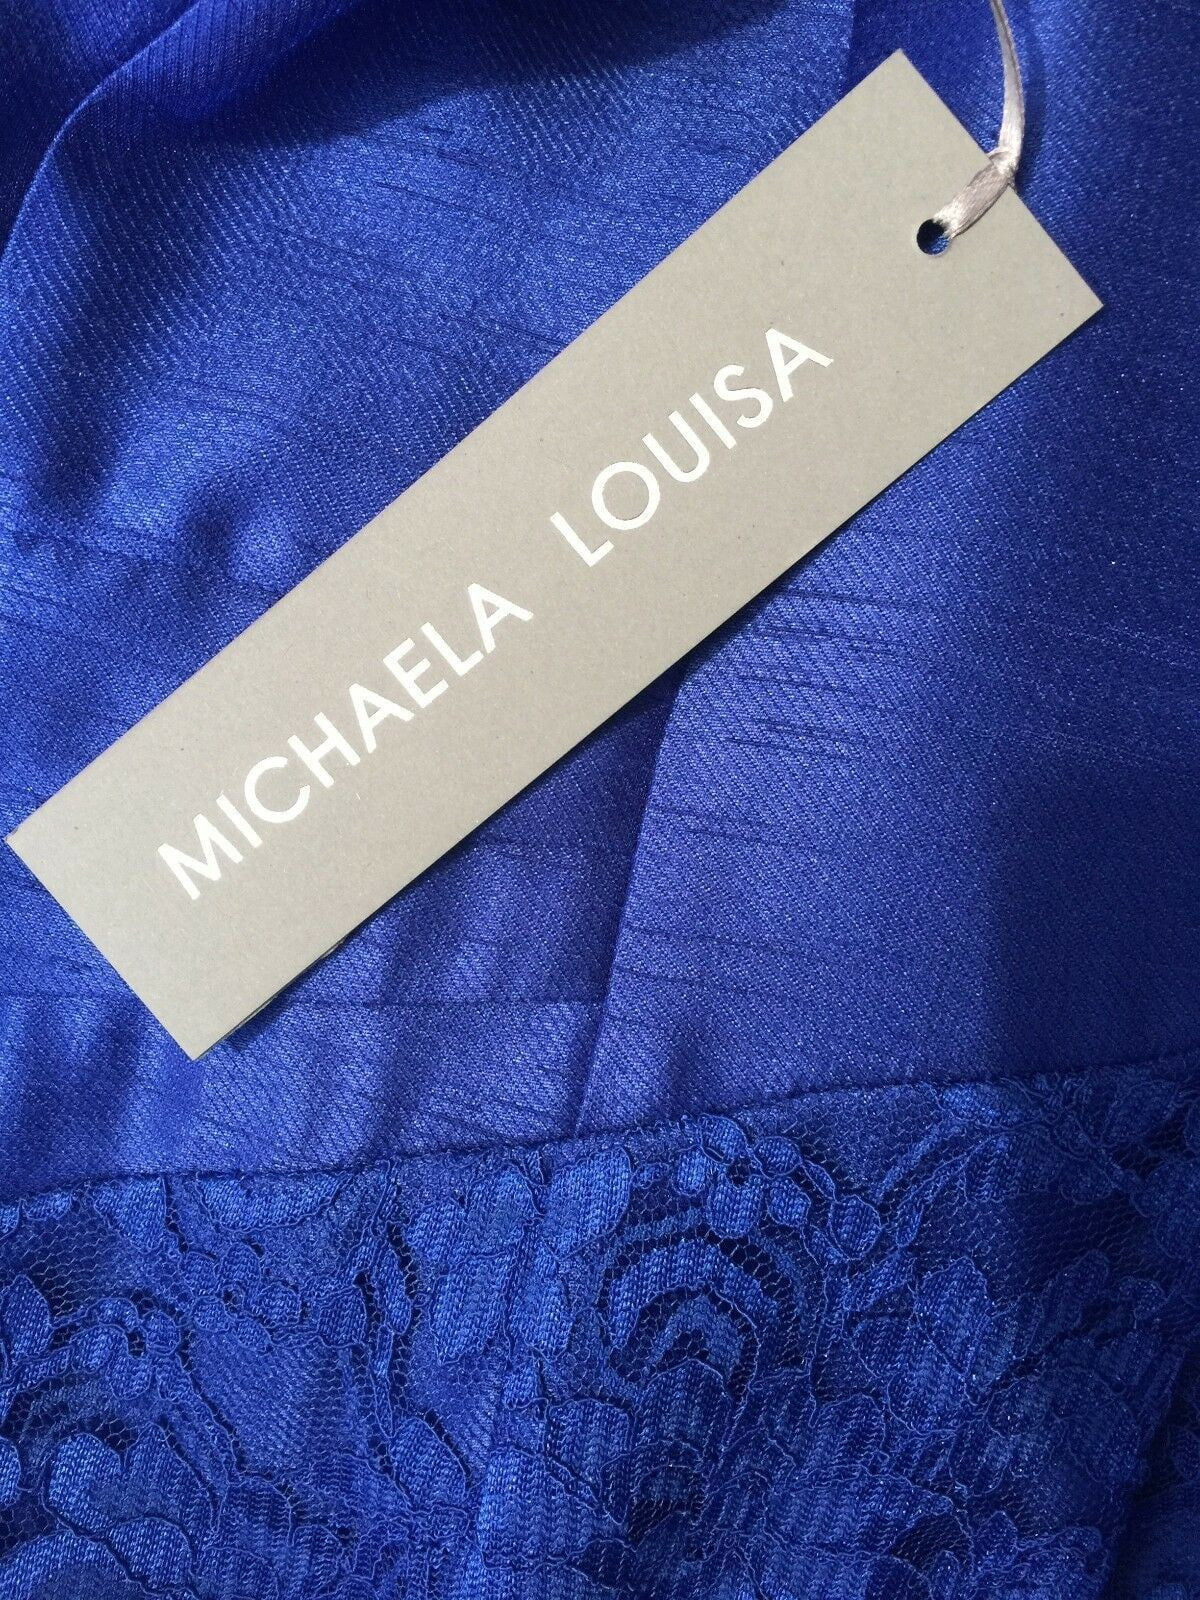 Michaela Louisa Royal Blue Lace Special Occasion Outfit UK 10 US 6 EU 38 BNWT RRP £225 Timeless Fashions